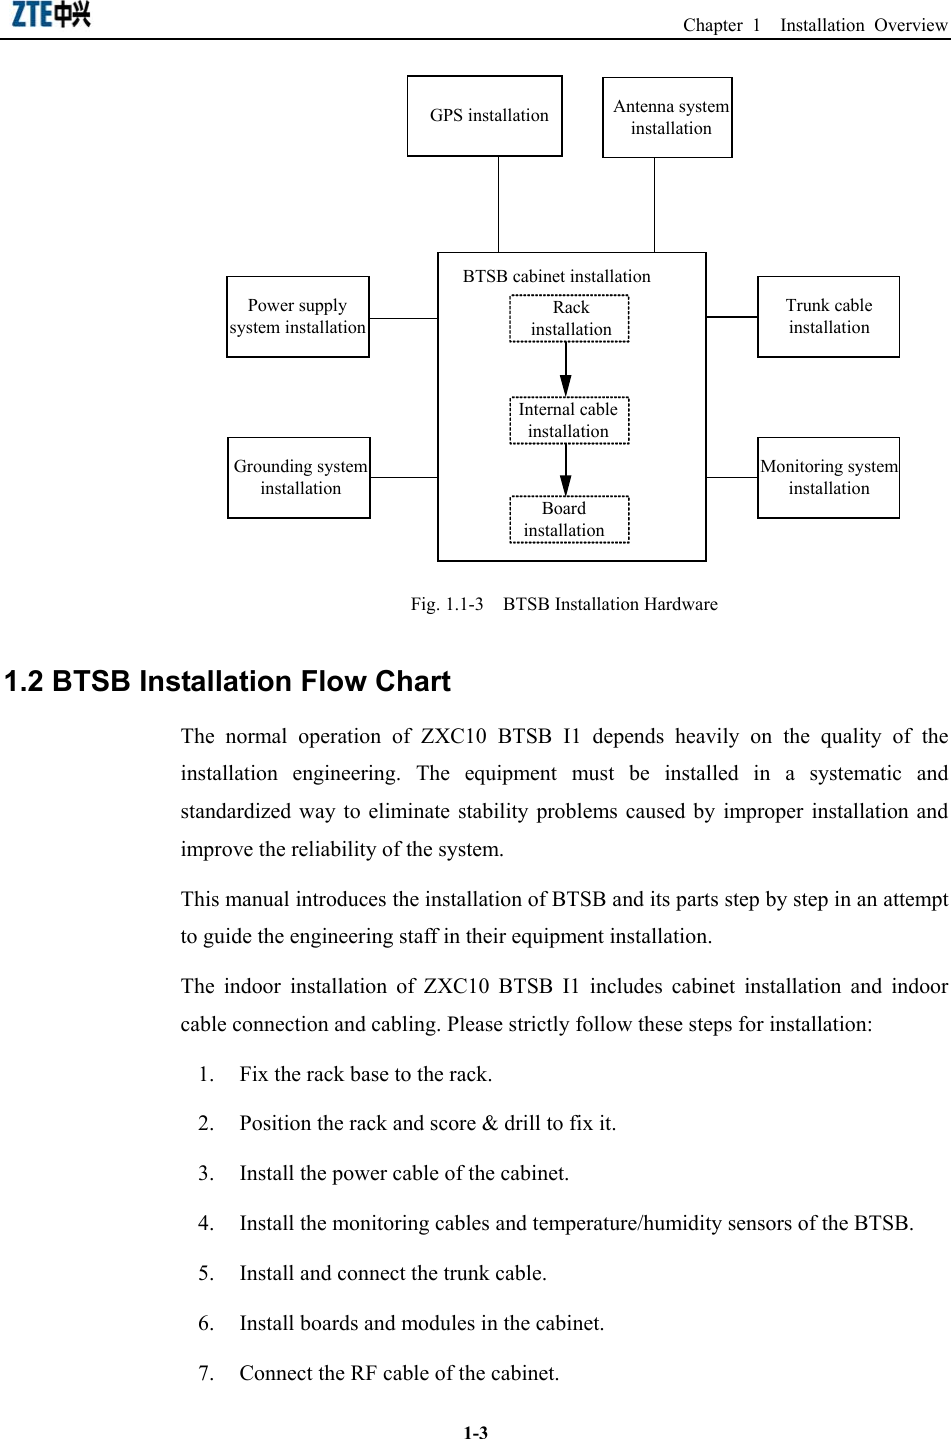                                                                Chapter 1  Installation Overview  1-3GPS installationRack installationInternal cable installationBoard installationBTSB cabinet installationTrunk cable installationPower supply system installationGrounding system installationMonitoring system installationAntenna system installation Fig. 1.1-3  BTSB Installation Hardware   1.2 BTSB Installation Flow Chart The normal operation of ZXC10 BTSB I1 depends heavily on the quality of the installation engineering. The equipment must be installed in a systematic and standardized way to eliminate stability problems caused by improper installation and improve the reliability of the system. This manual introduces the installation of BTSB and its parts step by step in an attempt to guide the engineering staff in their equipment installation.   The indoor installation of ZXC10 BTSB I1 includes cabinet installation and indoor cable connection and cabling. Please strictly follow these steps for installation:   1.  Fix the rack base to the rack.   2.  Position the rack and score &amp; drill to fix it. 3.  Install the power cable of the cabinet. 4.  Install the monitoring cables and temperature/humidity sensors of the BTSB. 5.  Install and connect the trunk cable. 6.  Install boards and modules in the cabinet. 7.  Connect the RF cable of the cabinet. 